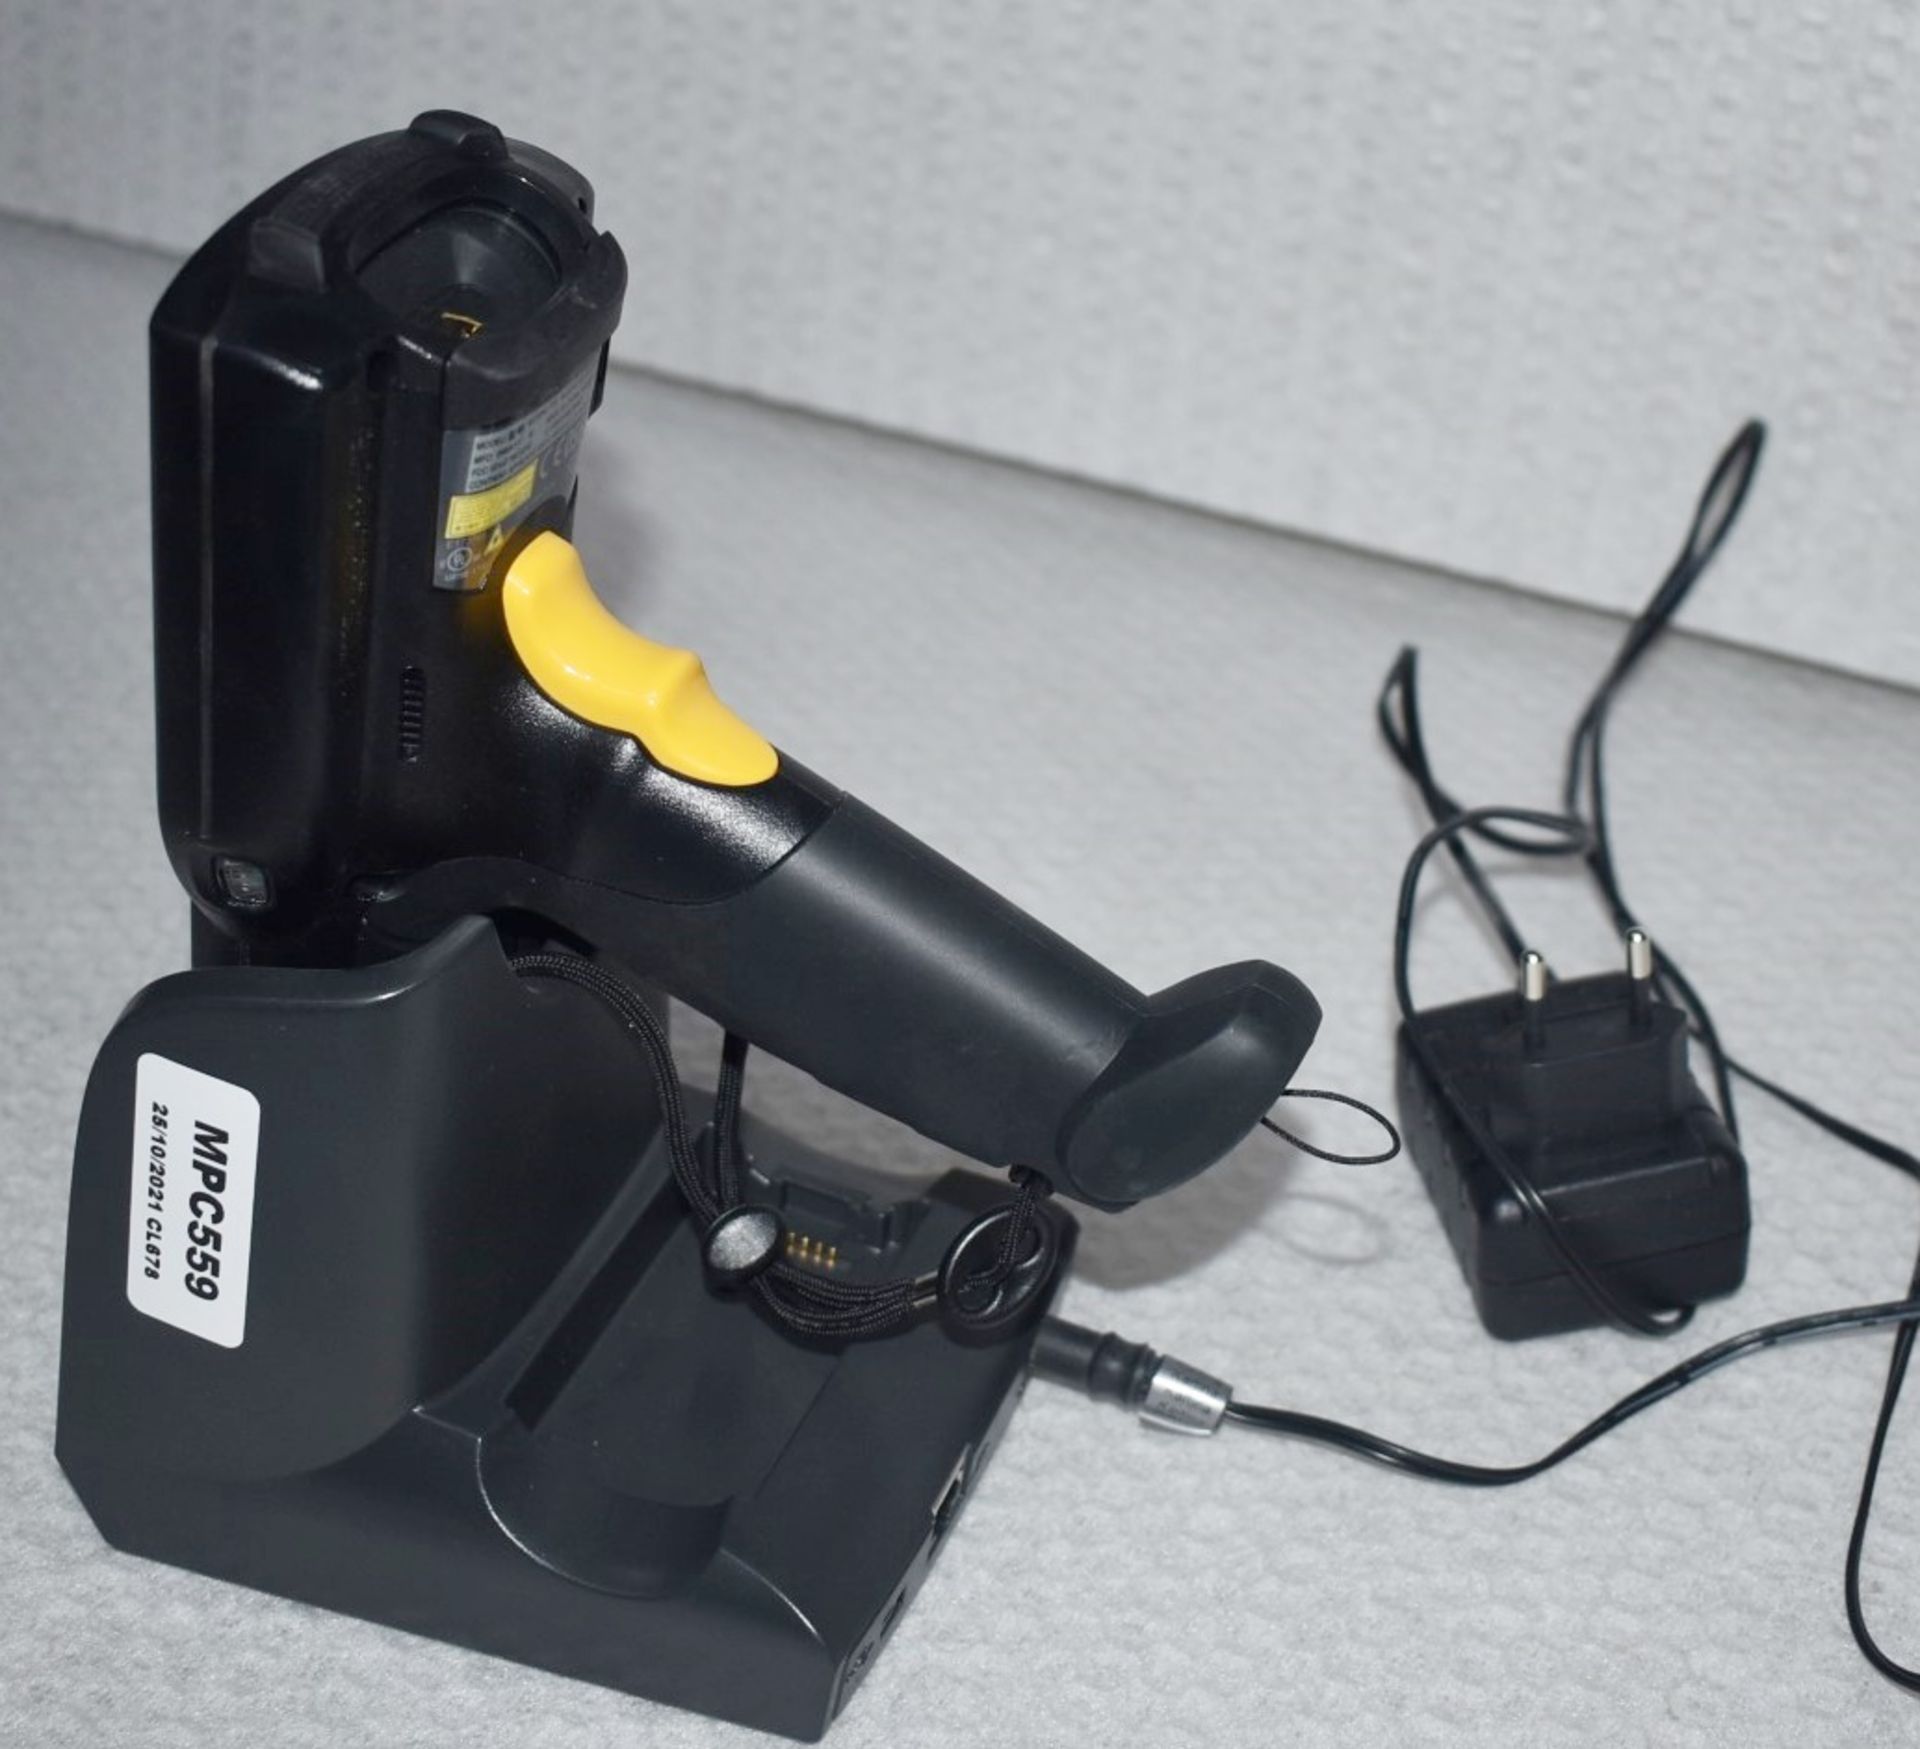 1 x Symbol MC3200 38 Key Laser Scanner With Docking Station - Features Windows Compact OS, - Image 5 of 10